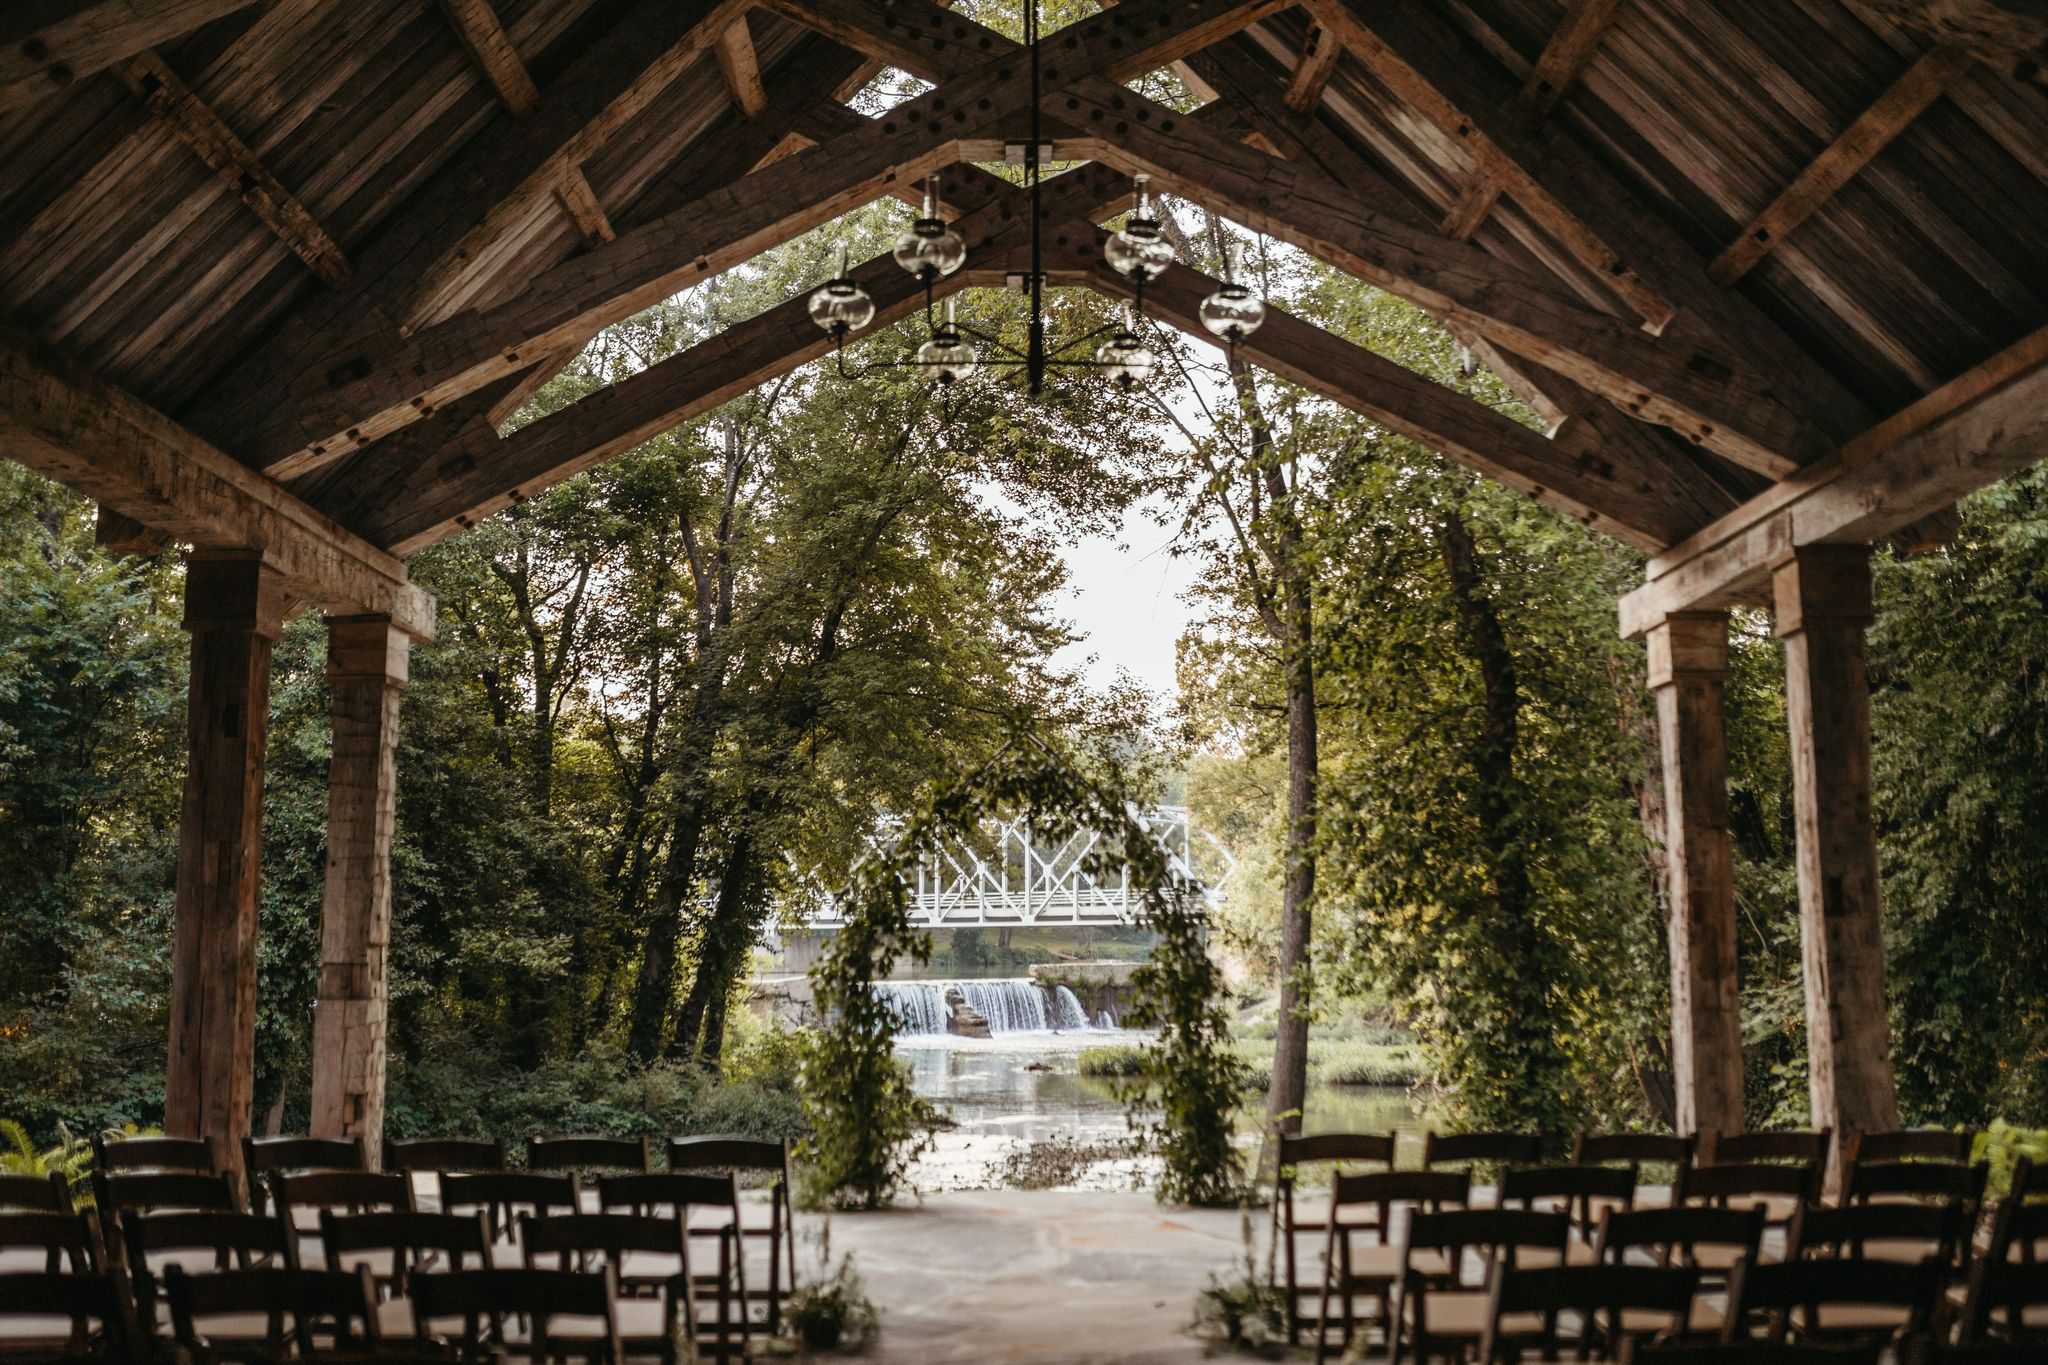 An outdoor wedding chapel overlooks the Finley River, the Riverside Bridge and rushing waterfalls.